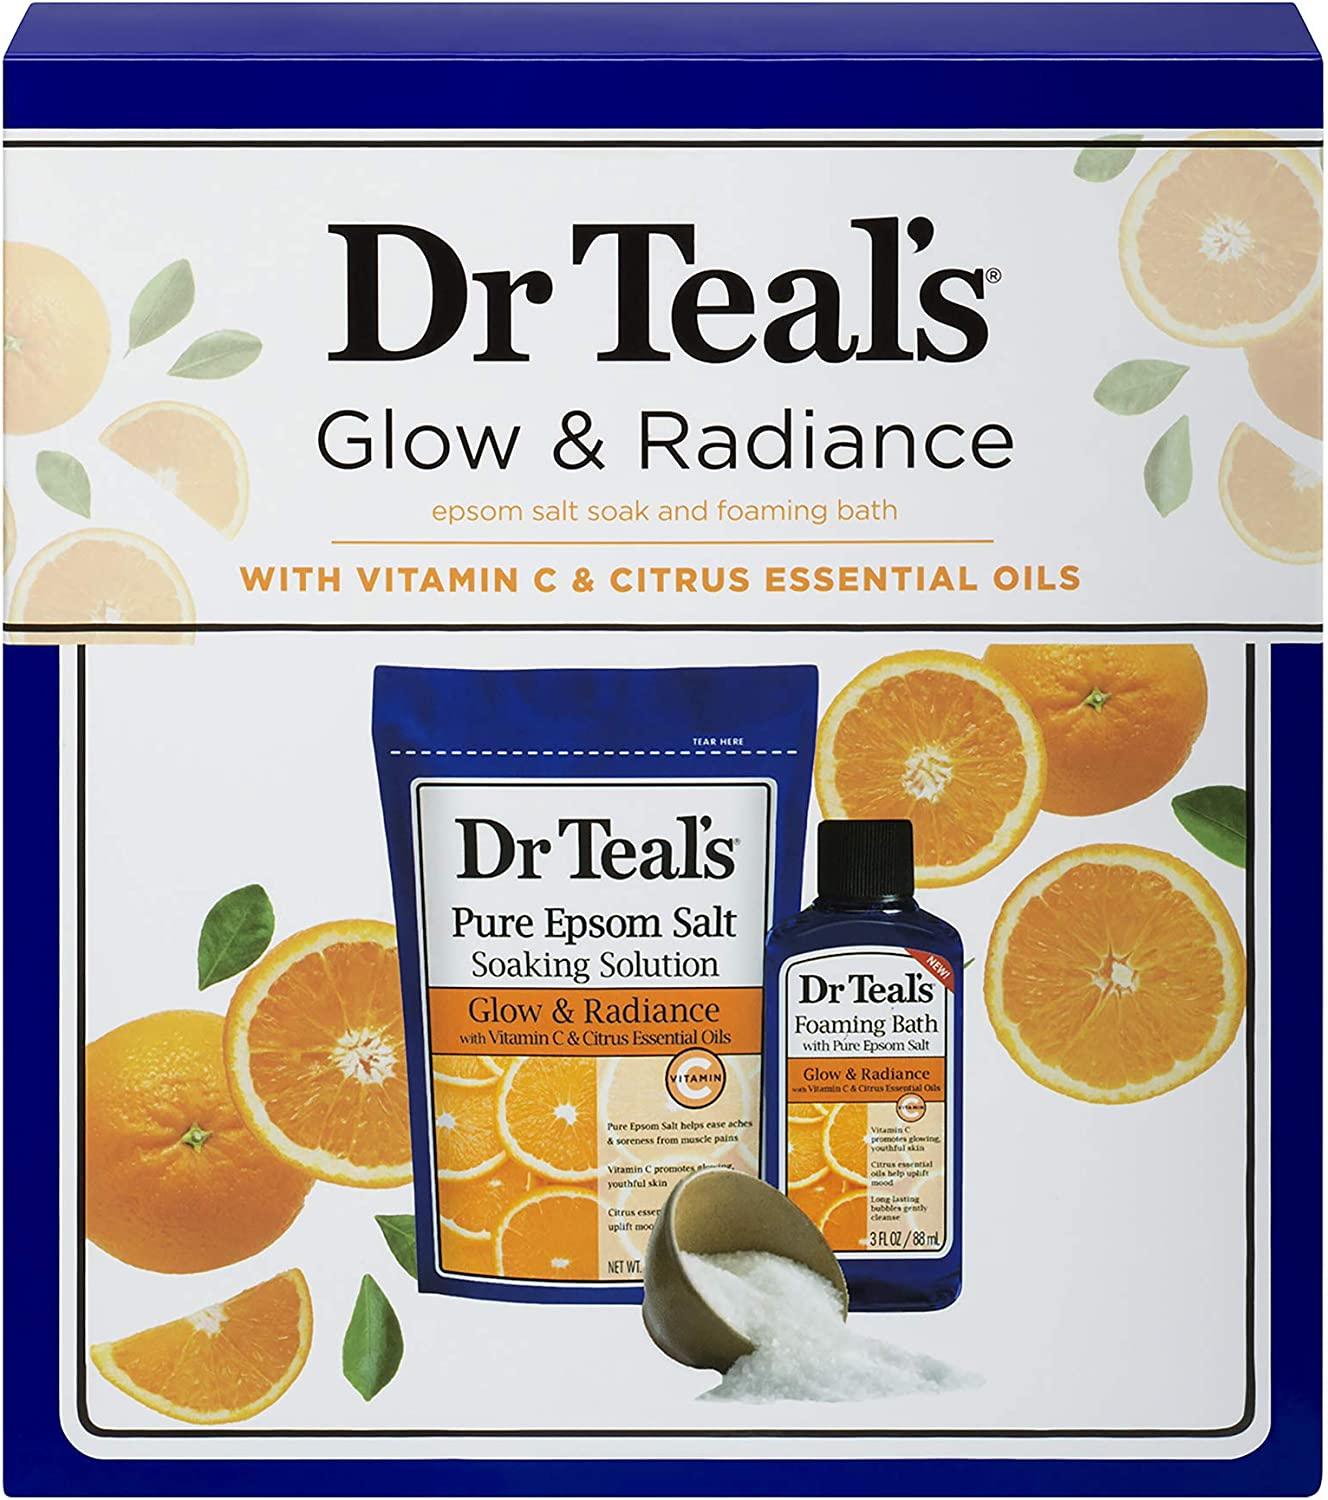 Dr Teal's Glow & Radiance with Vitamin C - Wellness Shoppee